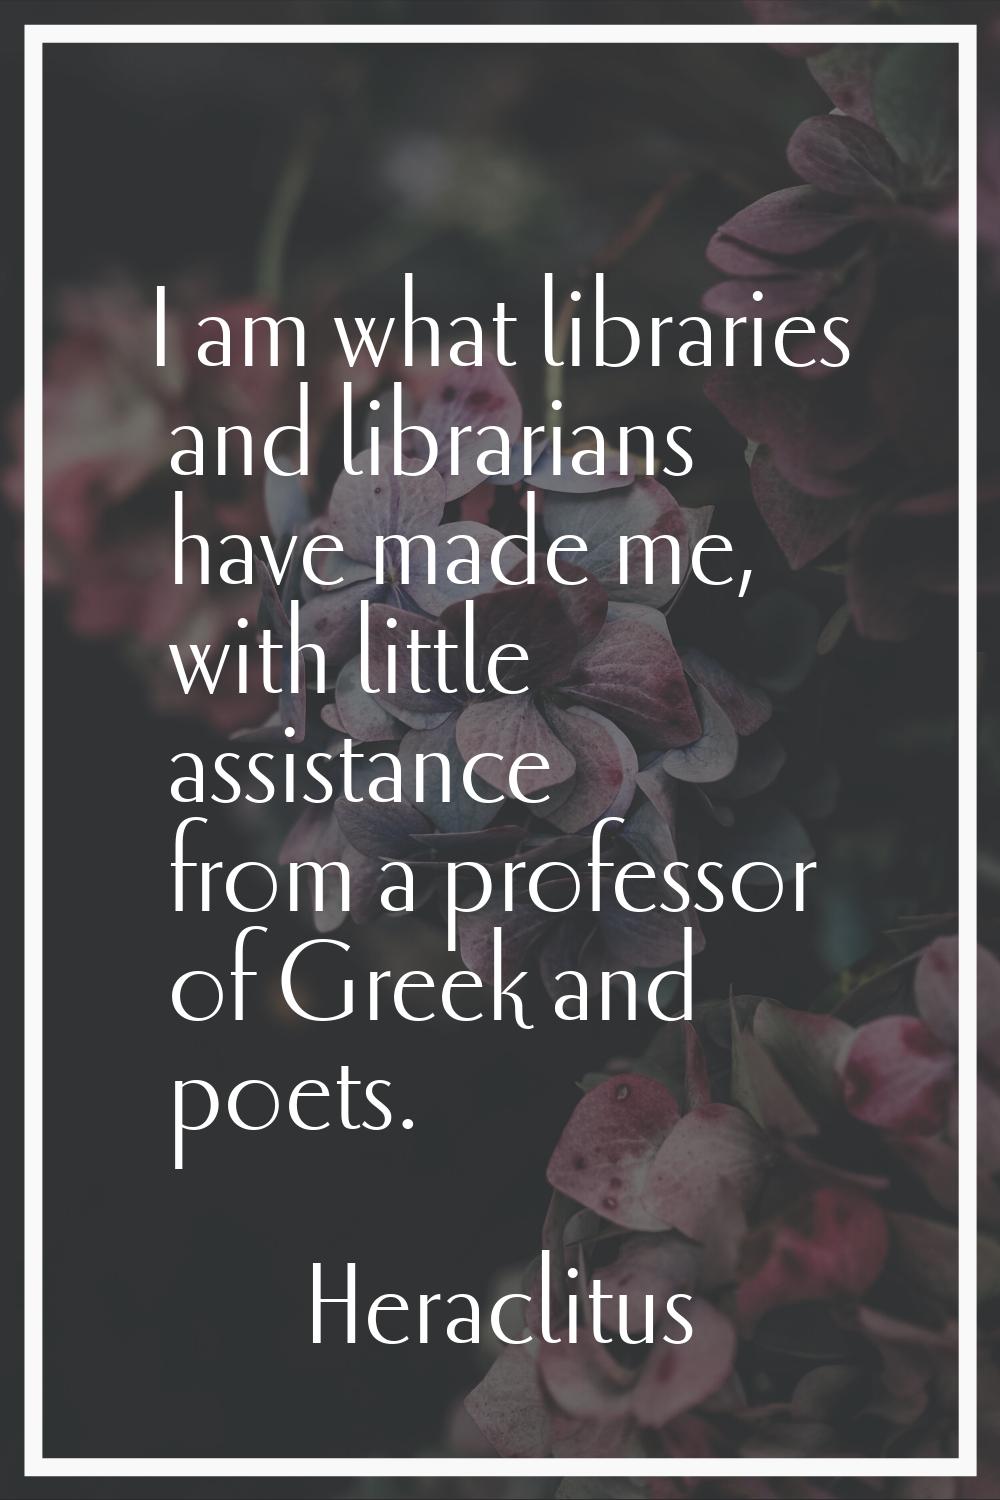 I am what libraries and librarians have made me, with little assistance from a professor of Greek a